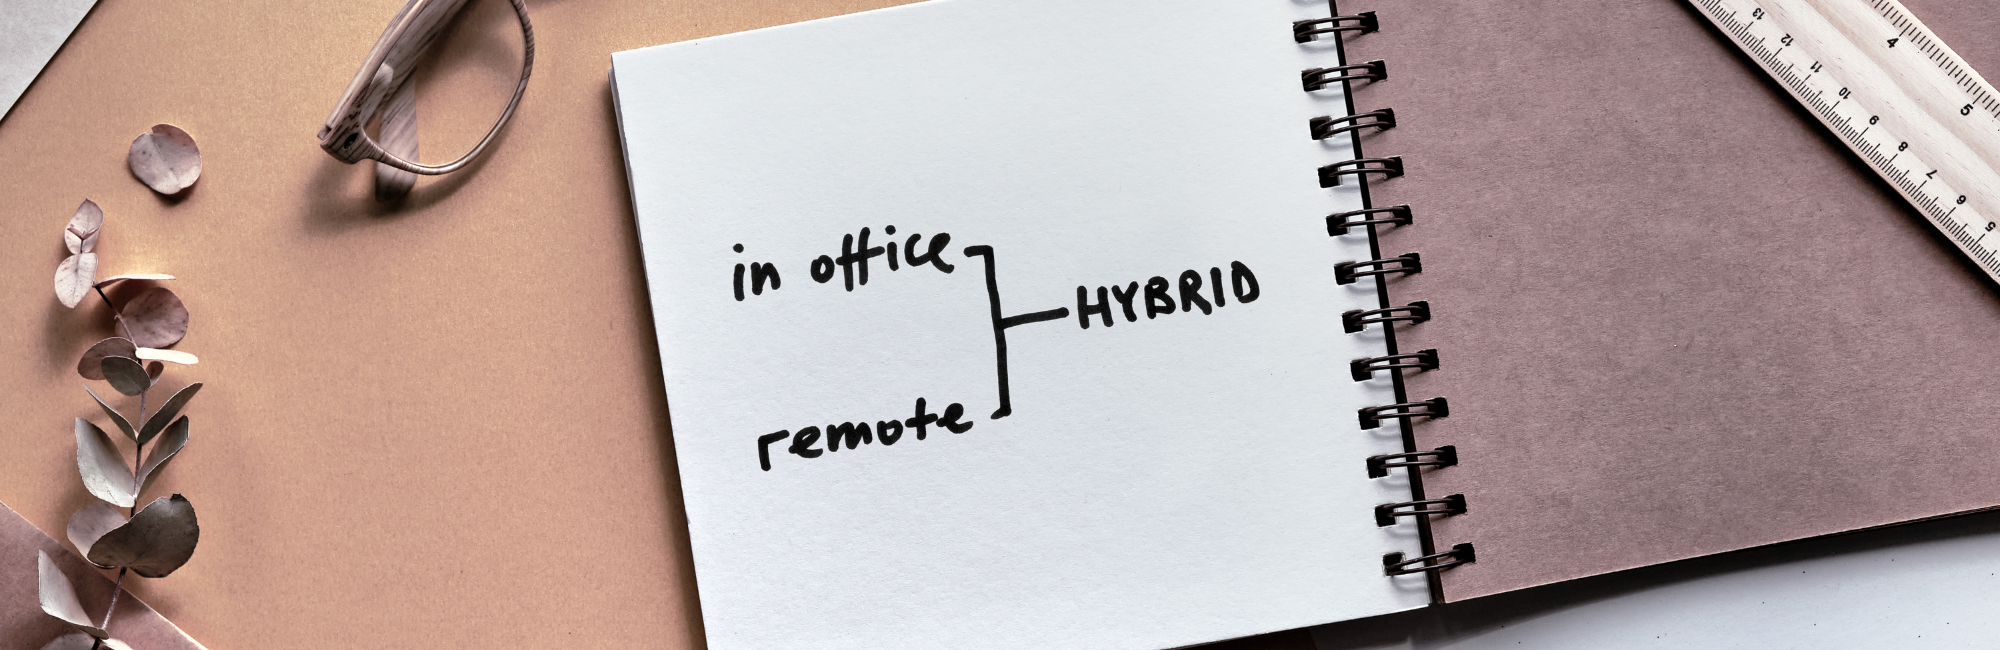 How law firm hybrid working policies are evolving